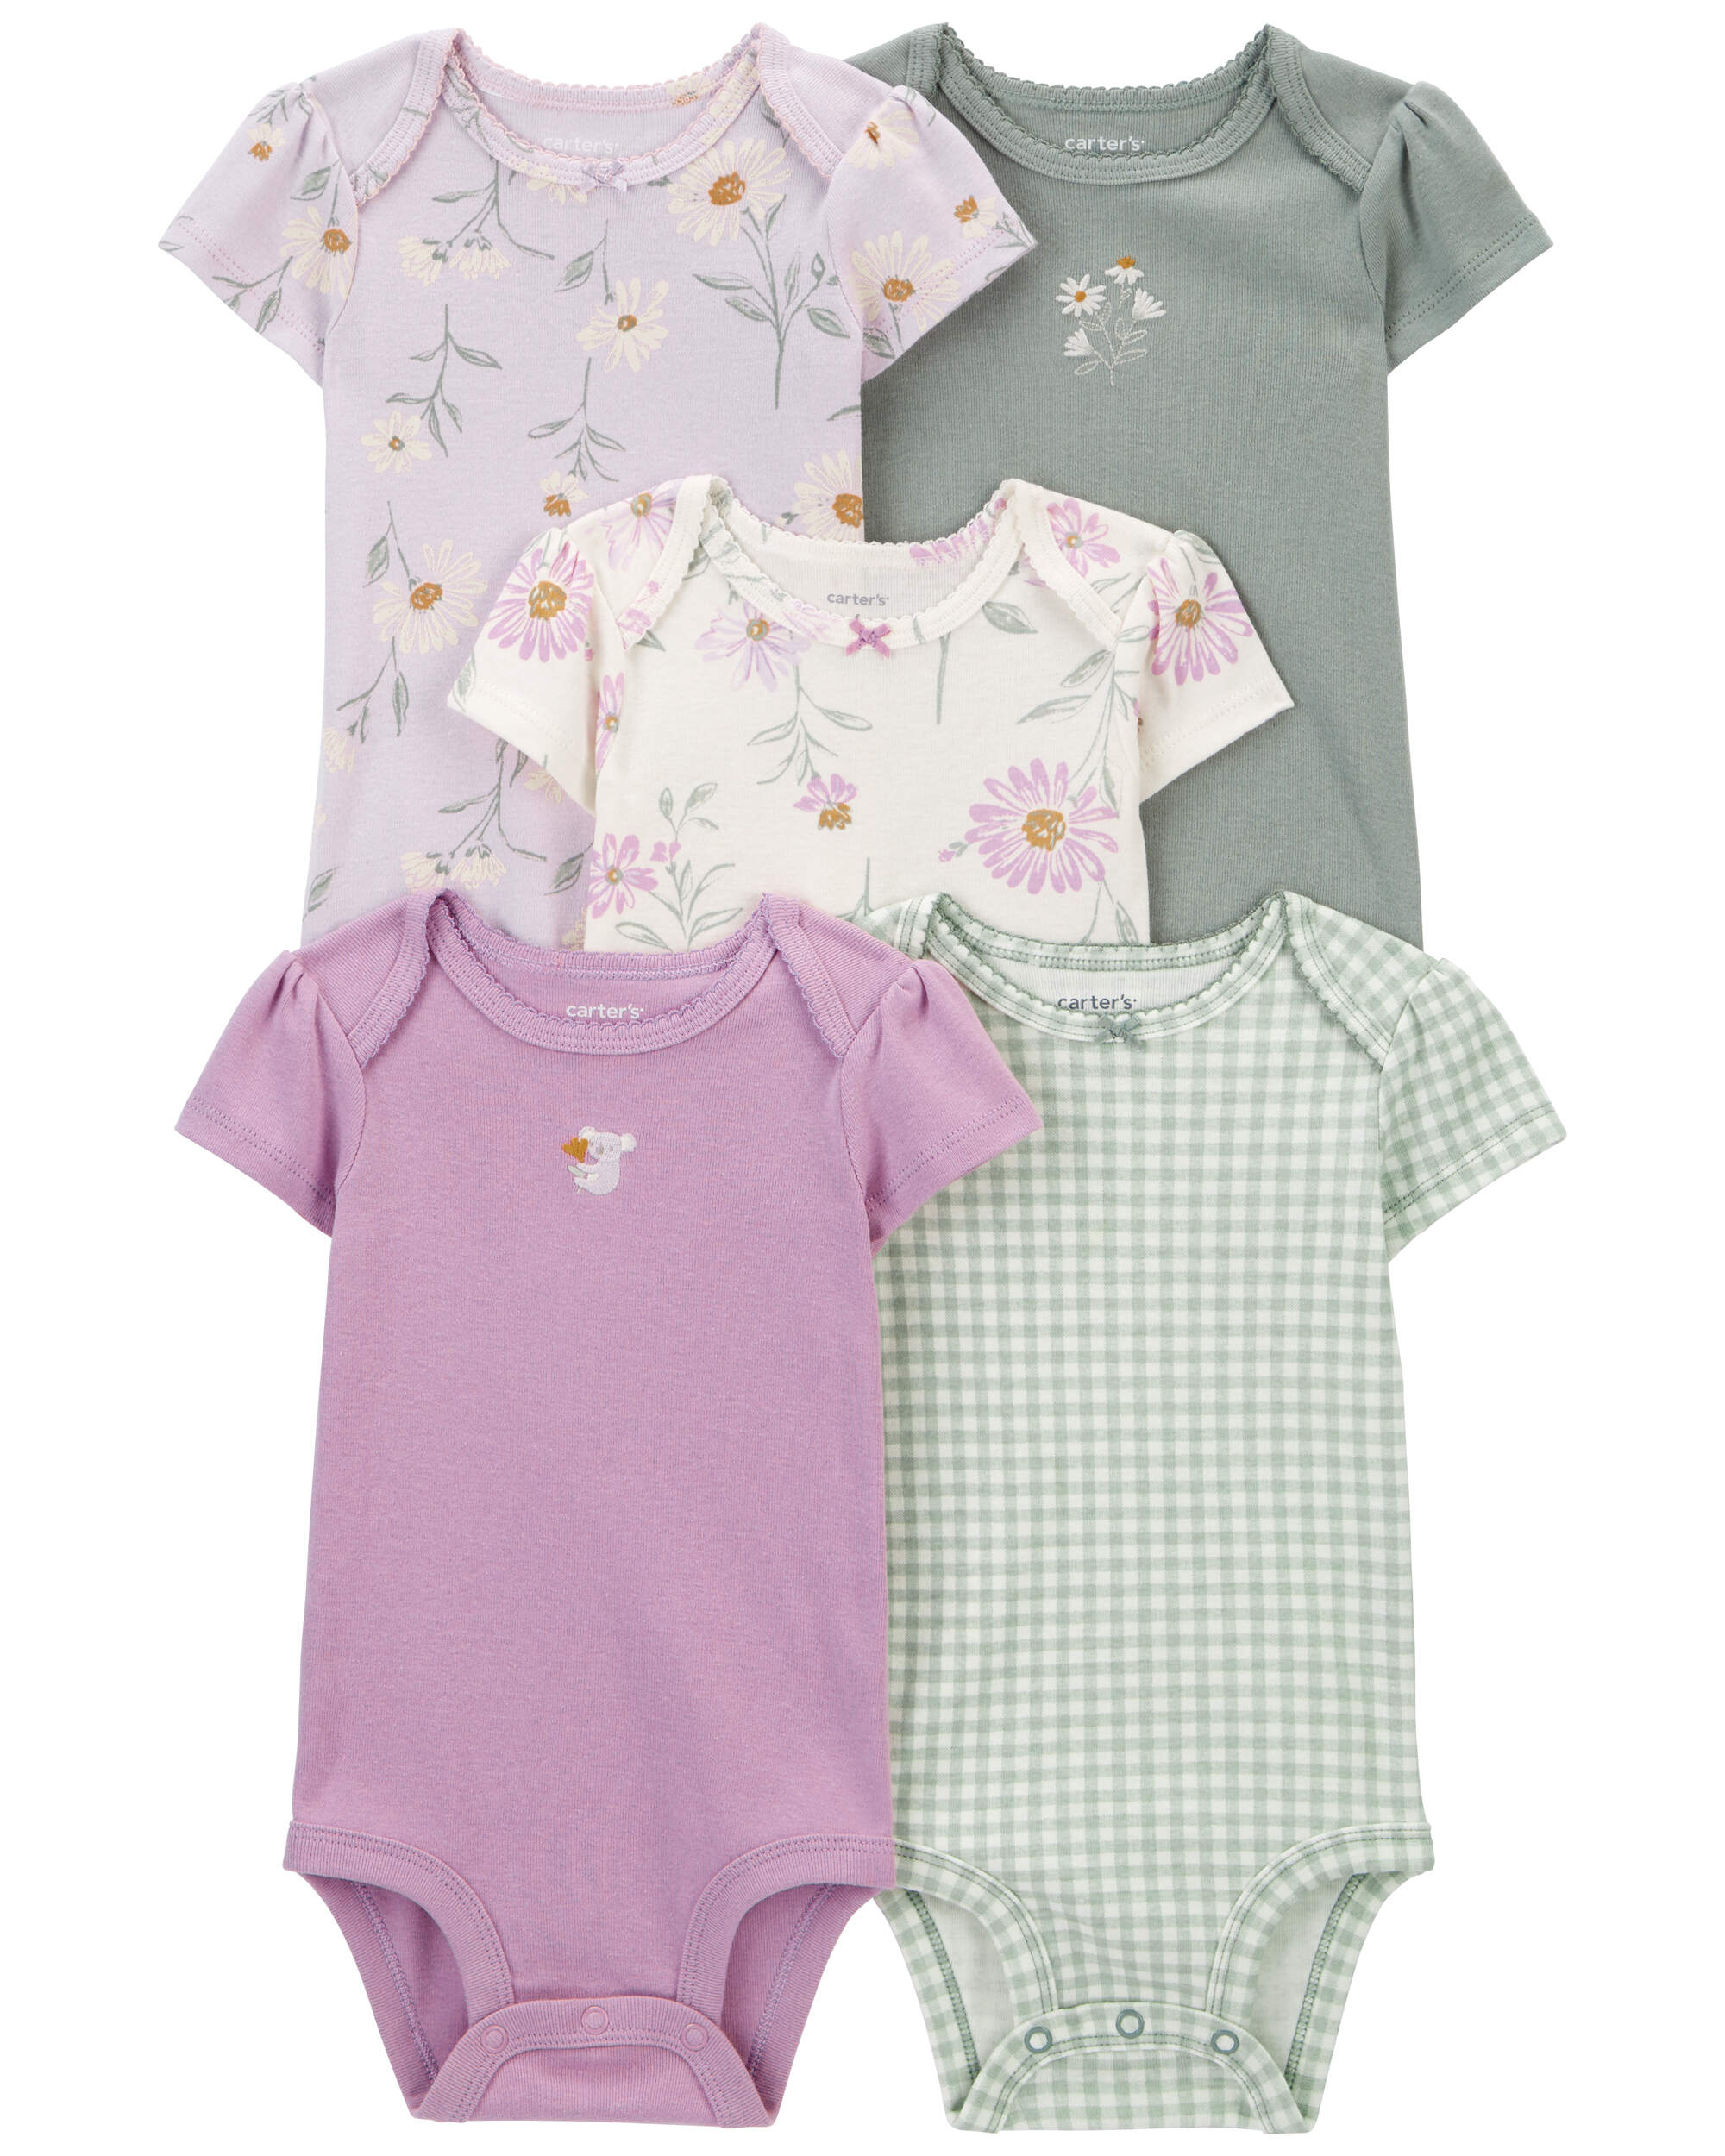 Baby 5-Pack Floral Short-Sleeve Bodysuits